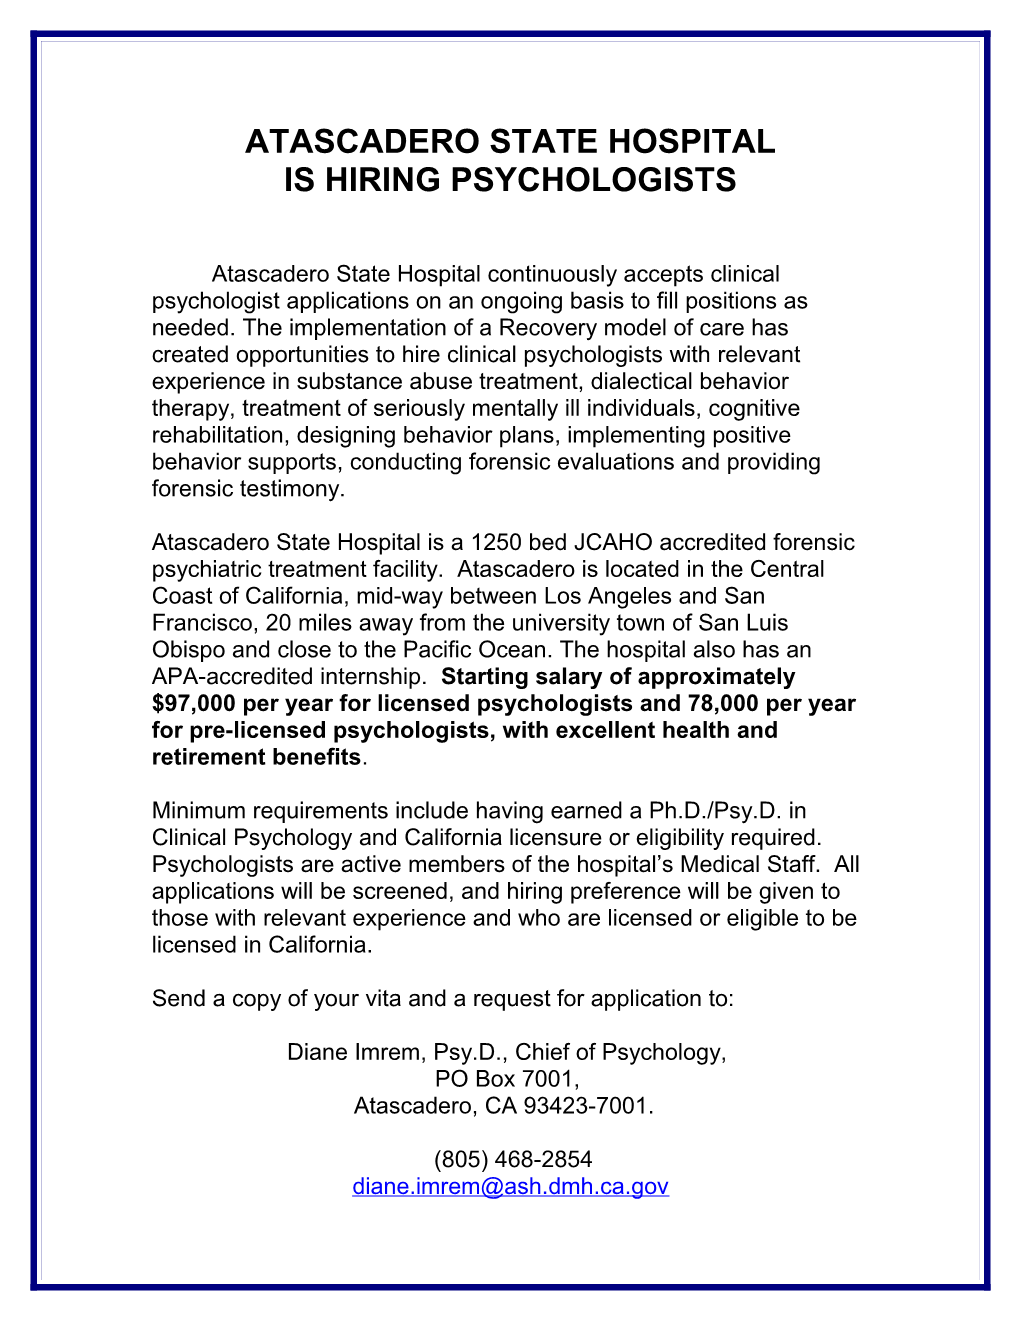 Atascadero State Hospital Continuously Accepts Clinical Psychologist Applications on An